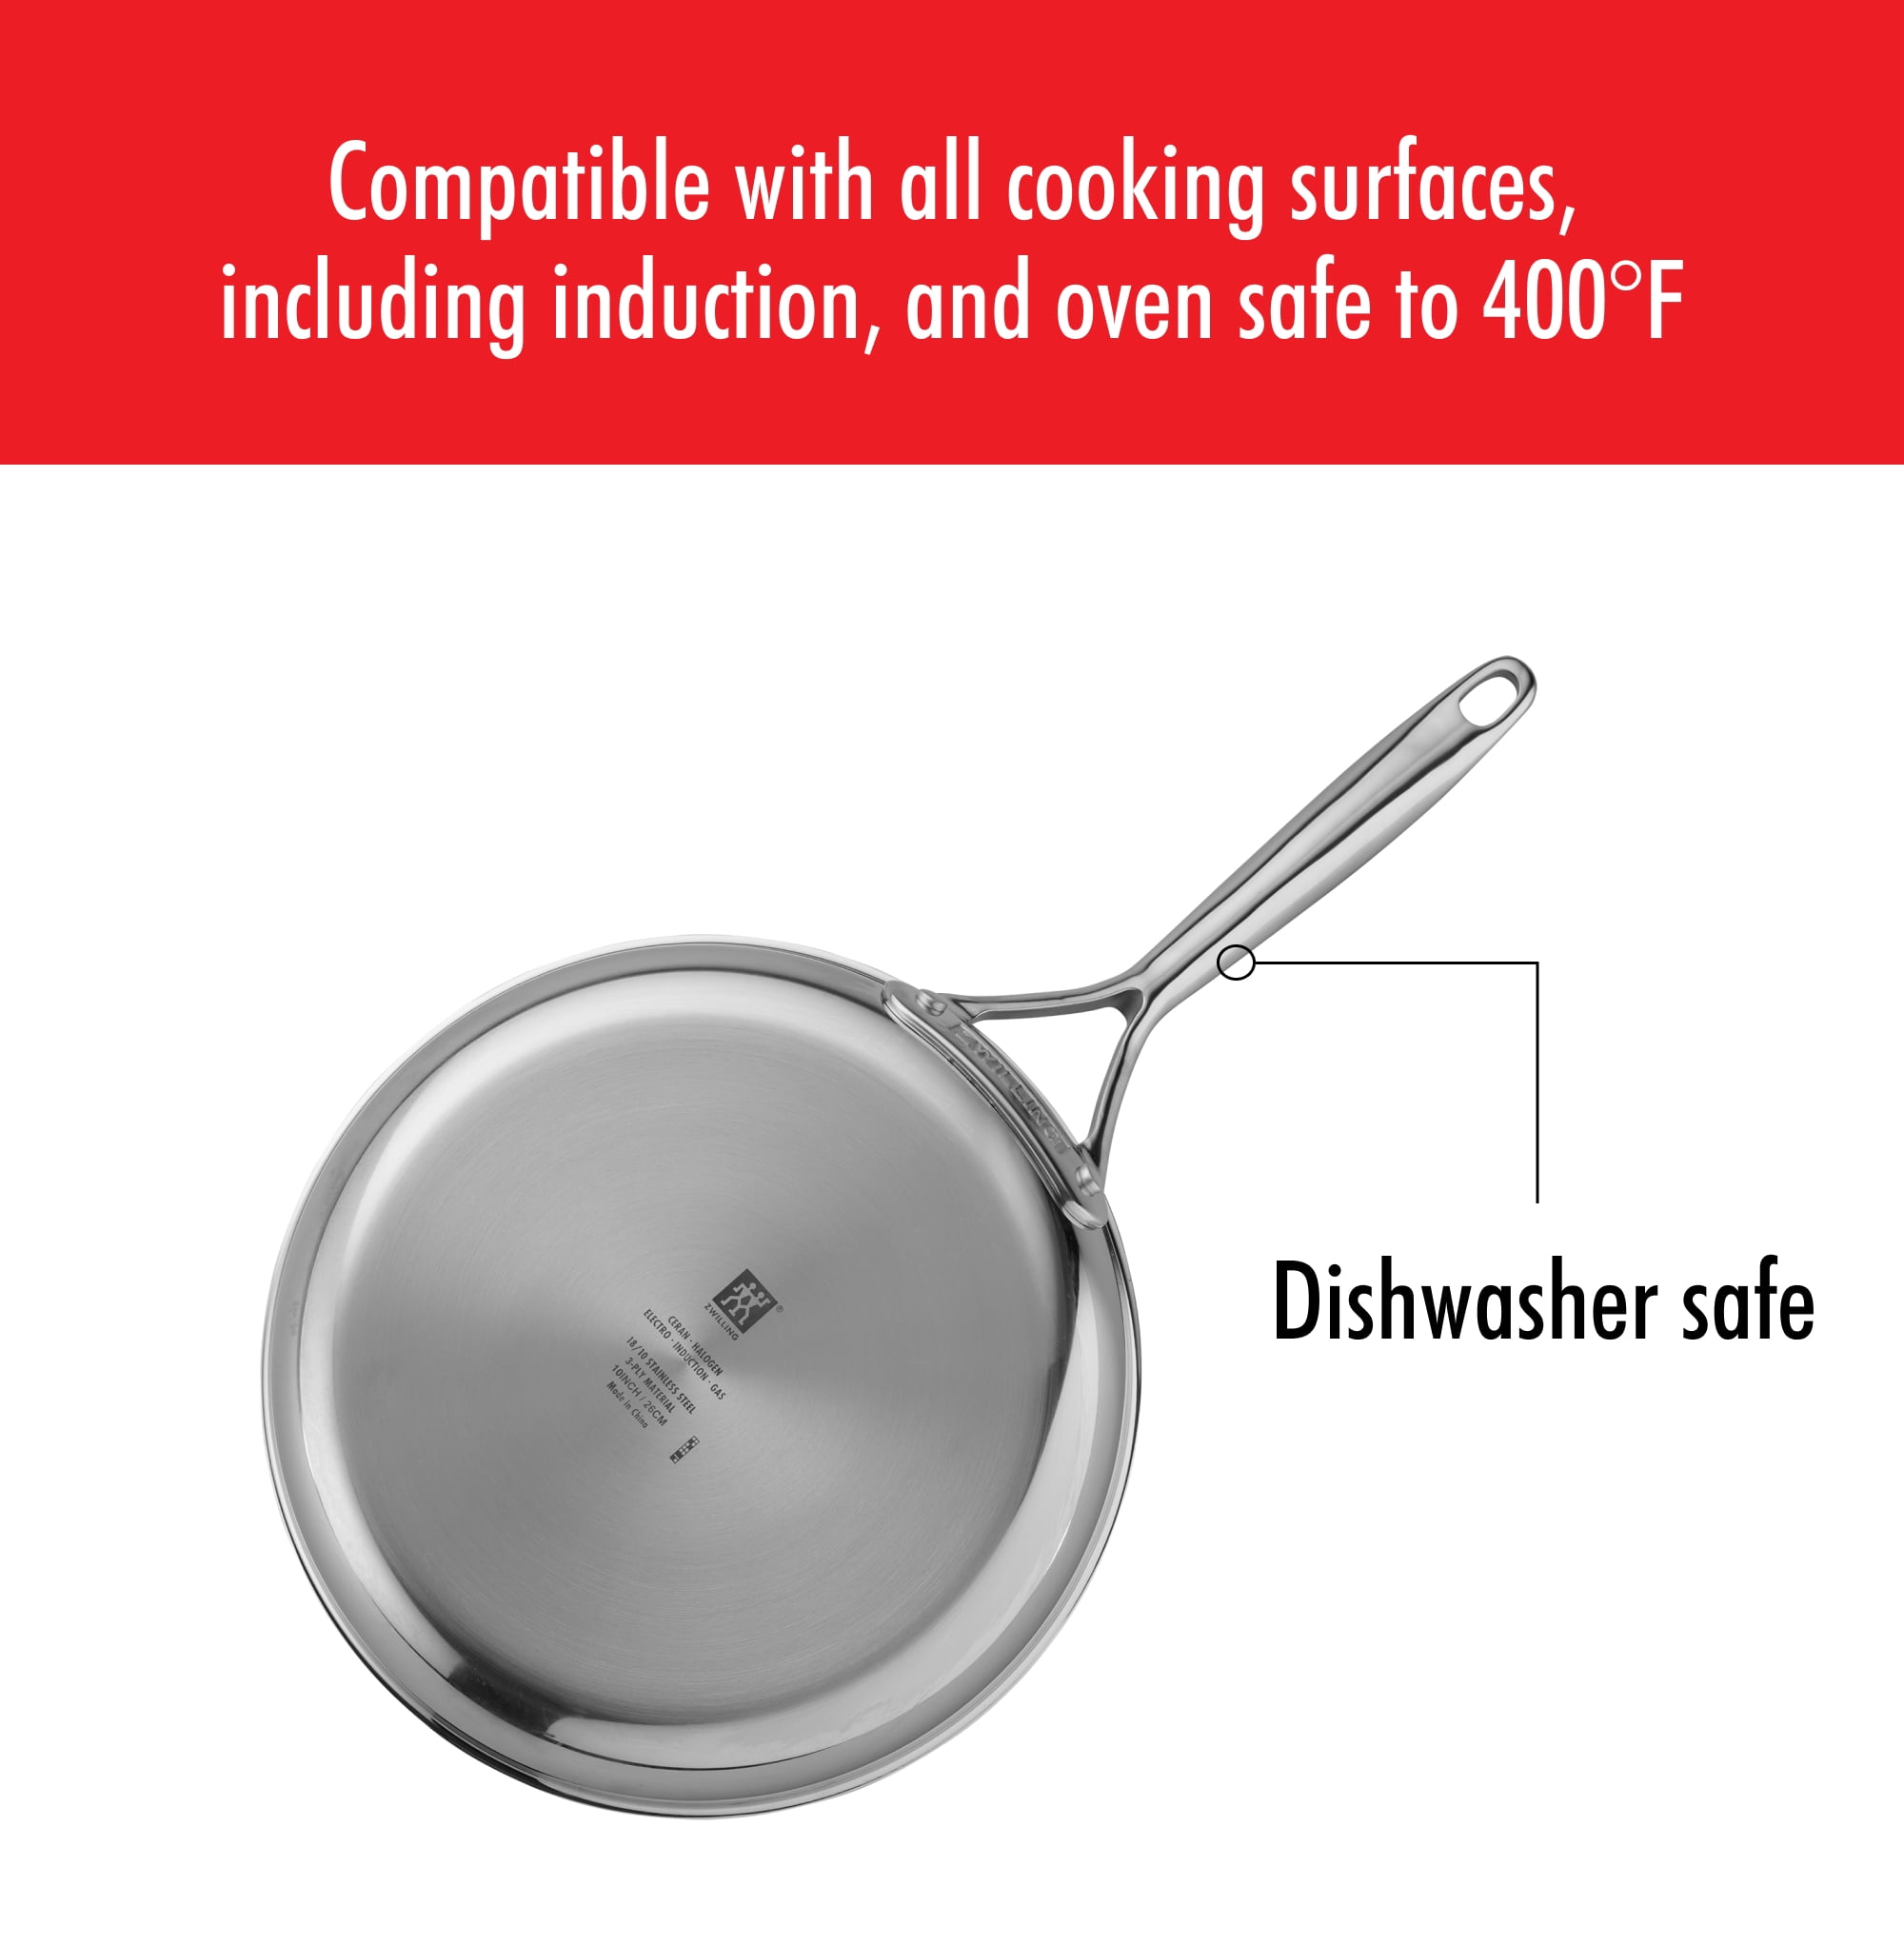 ZWILLING Clad CFX 10-inch Stainless Steel Ceramic Nonstick Fry Pan, 10-inch  - Kroger